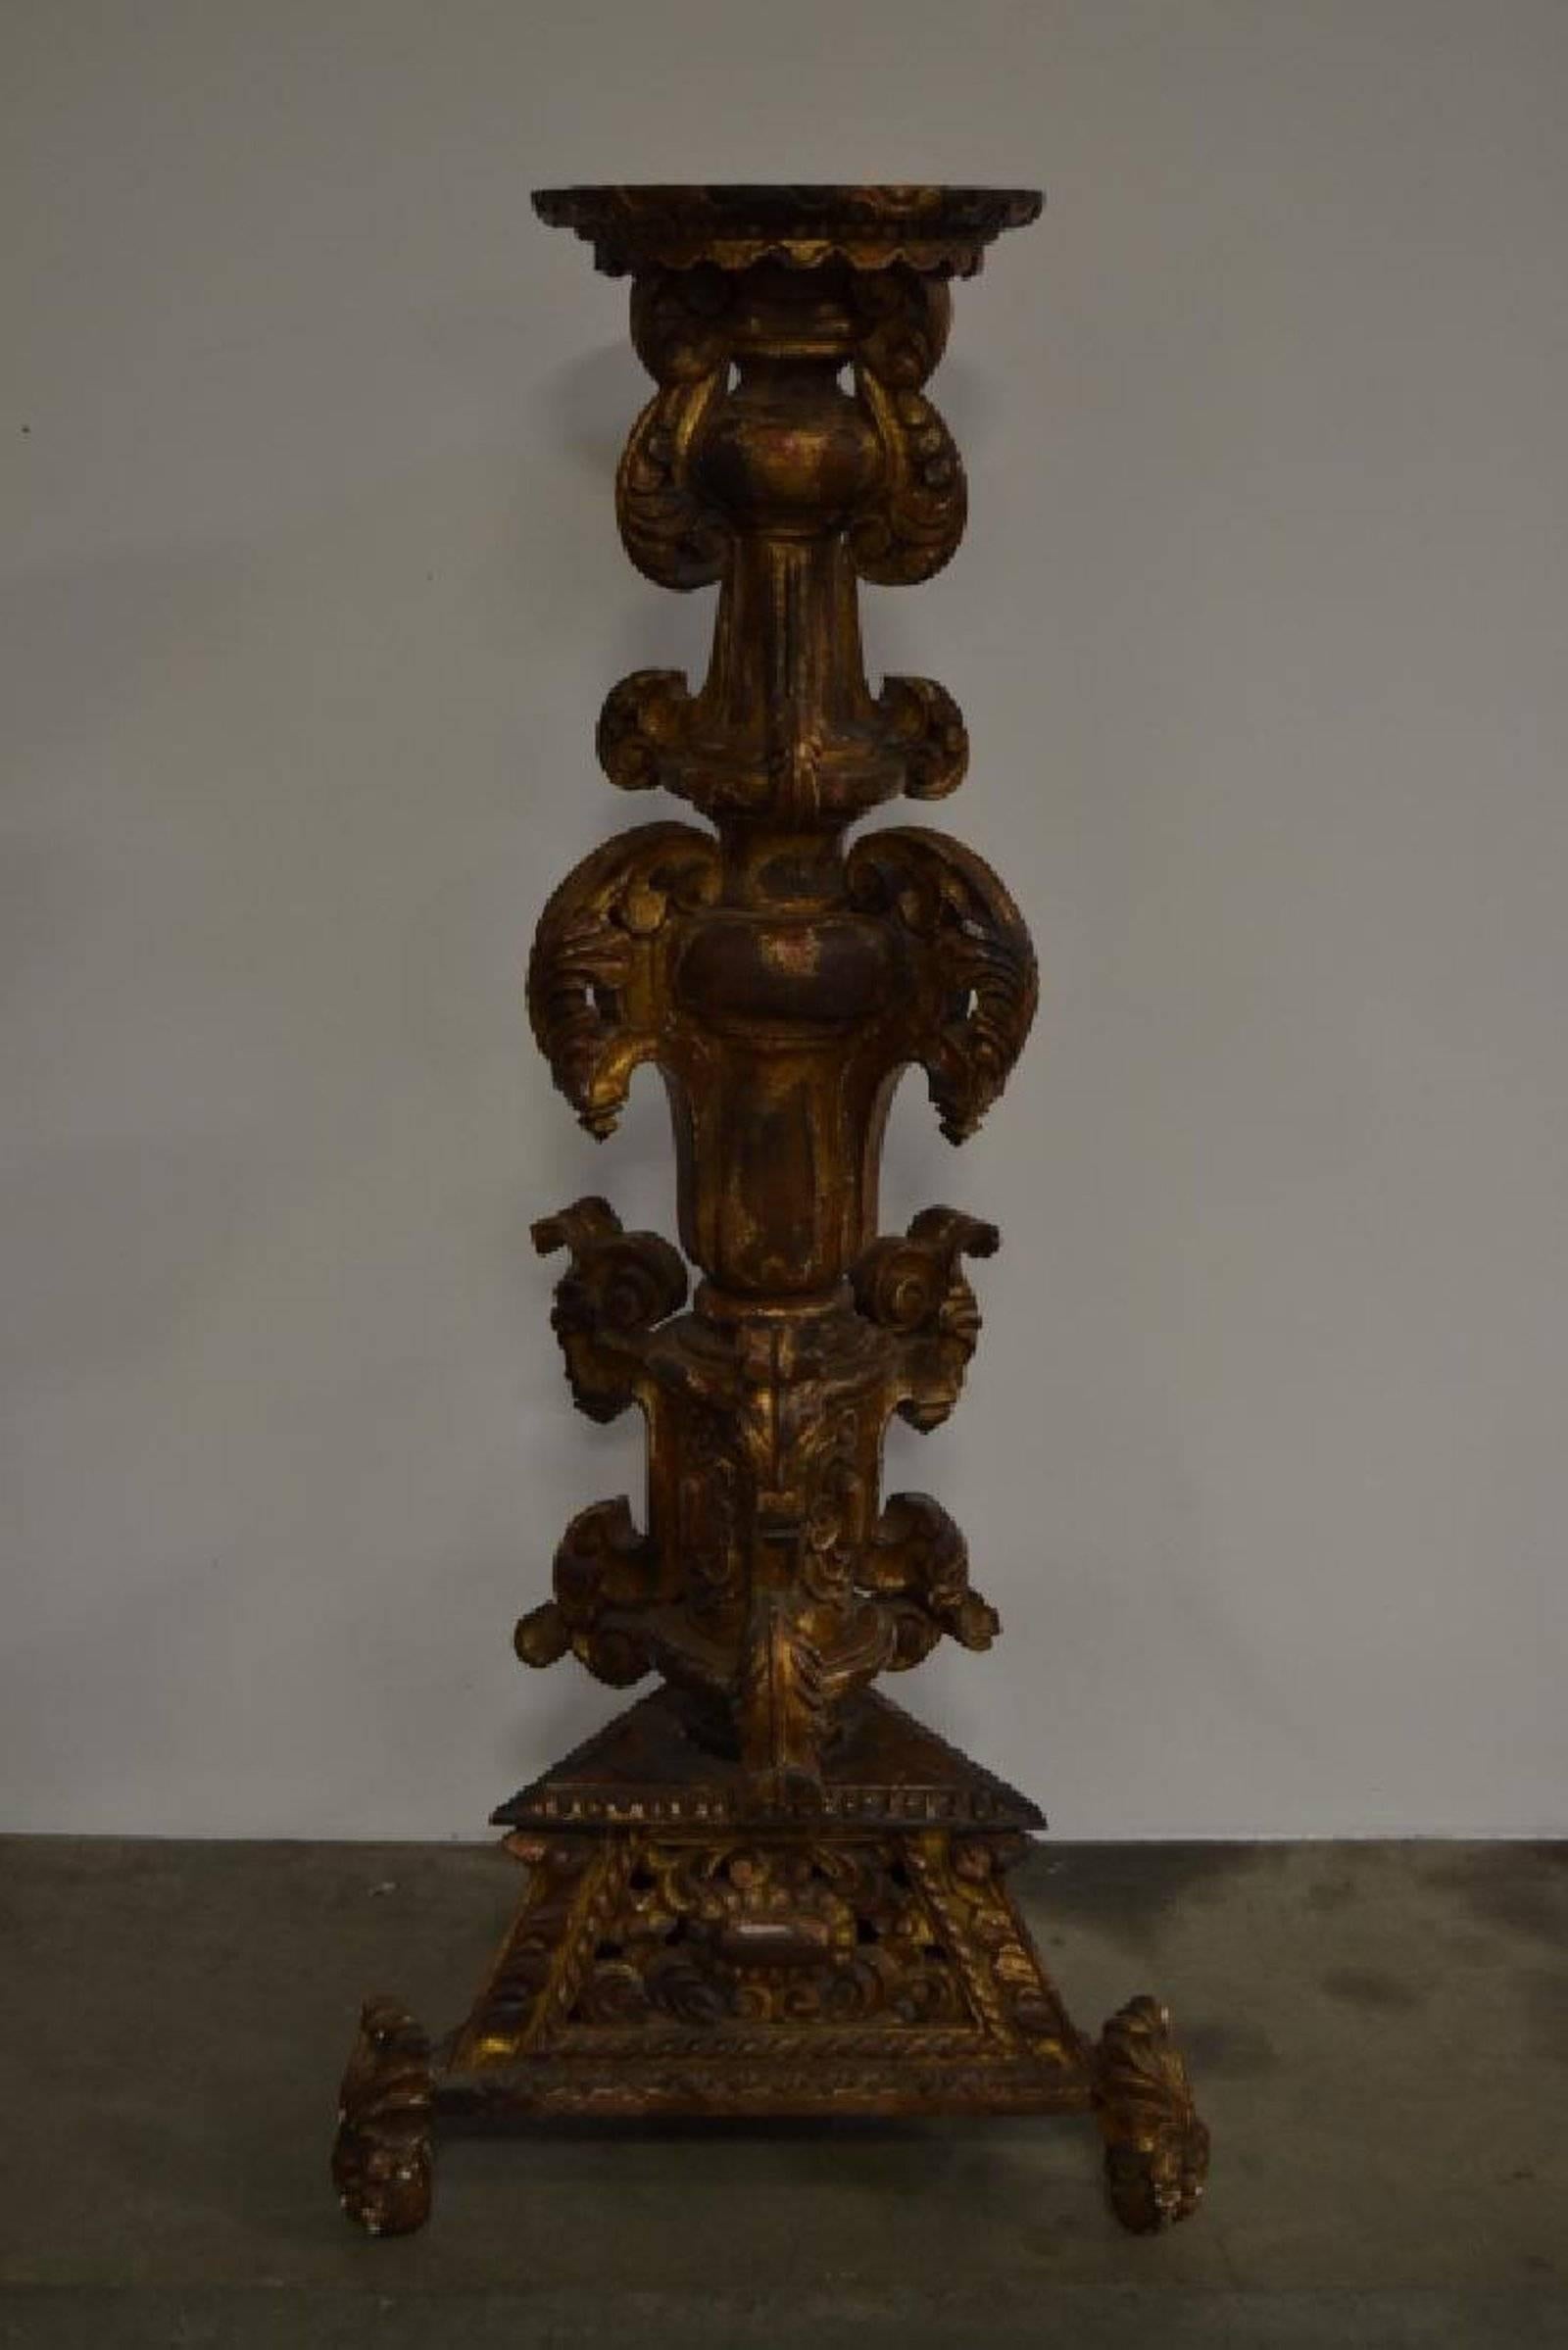 Pair of fabulous carved wood Monumental pedestals for jardinieres or candelabras, earlier than 19th century. Measures: 5' tall and 30' wide at base.